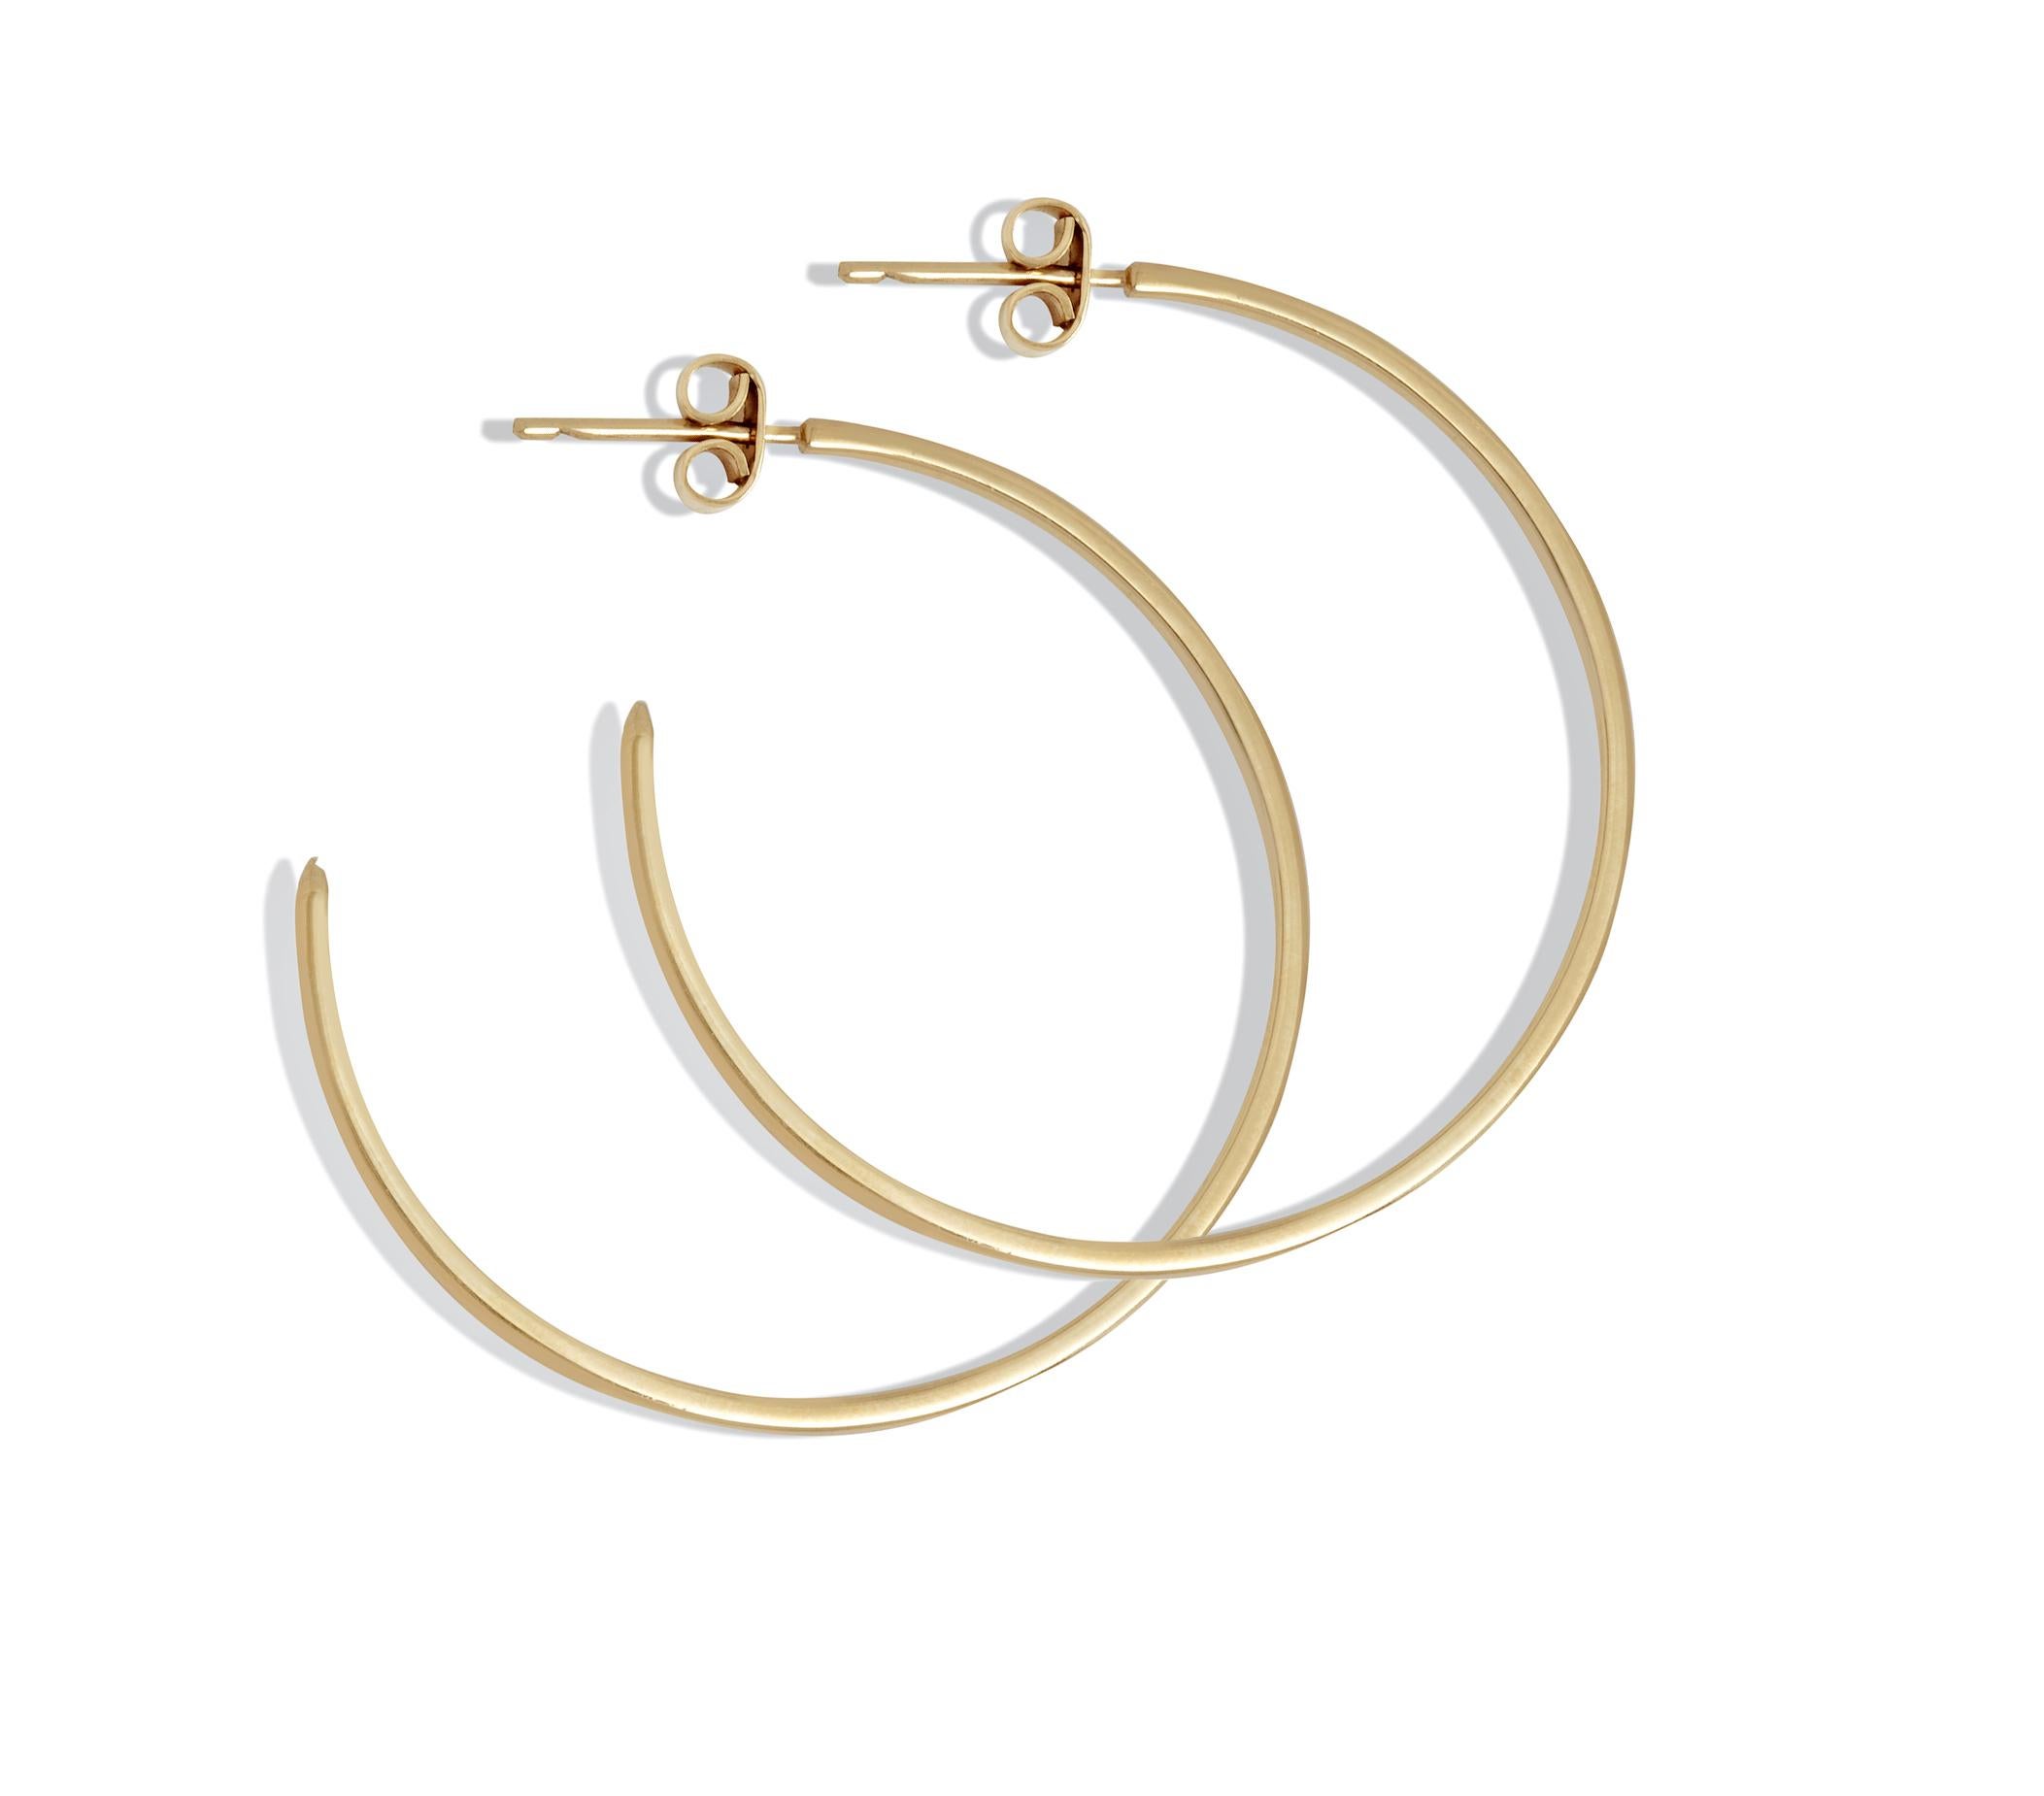 Modern Hoop Earrings in Yellow Gold with White Diamonds by Allison Bryan For Sale